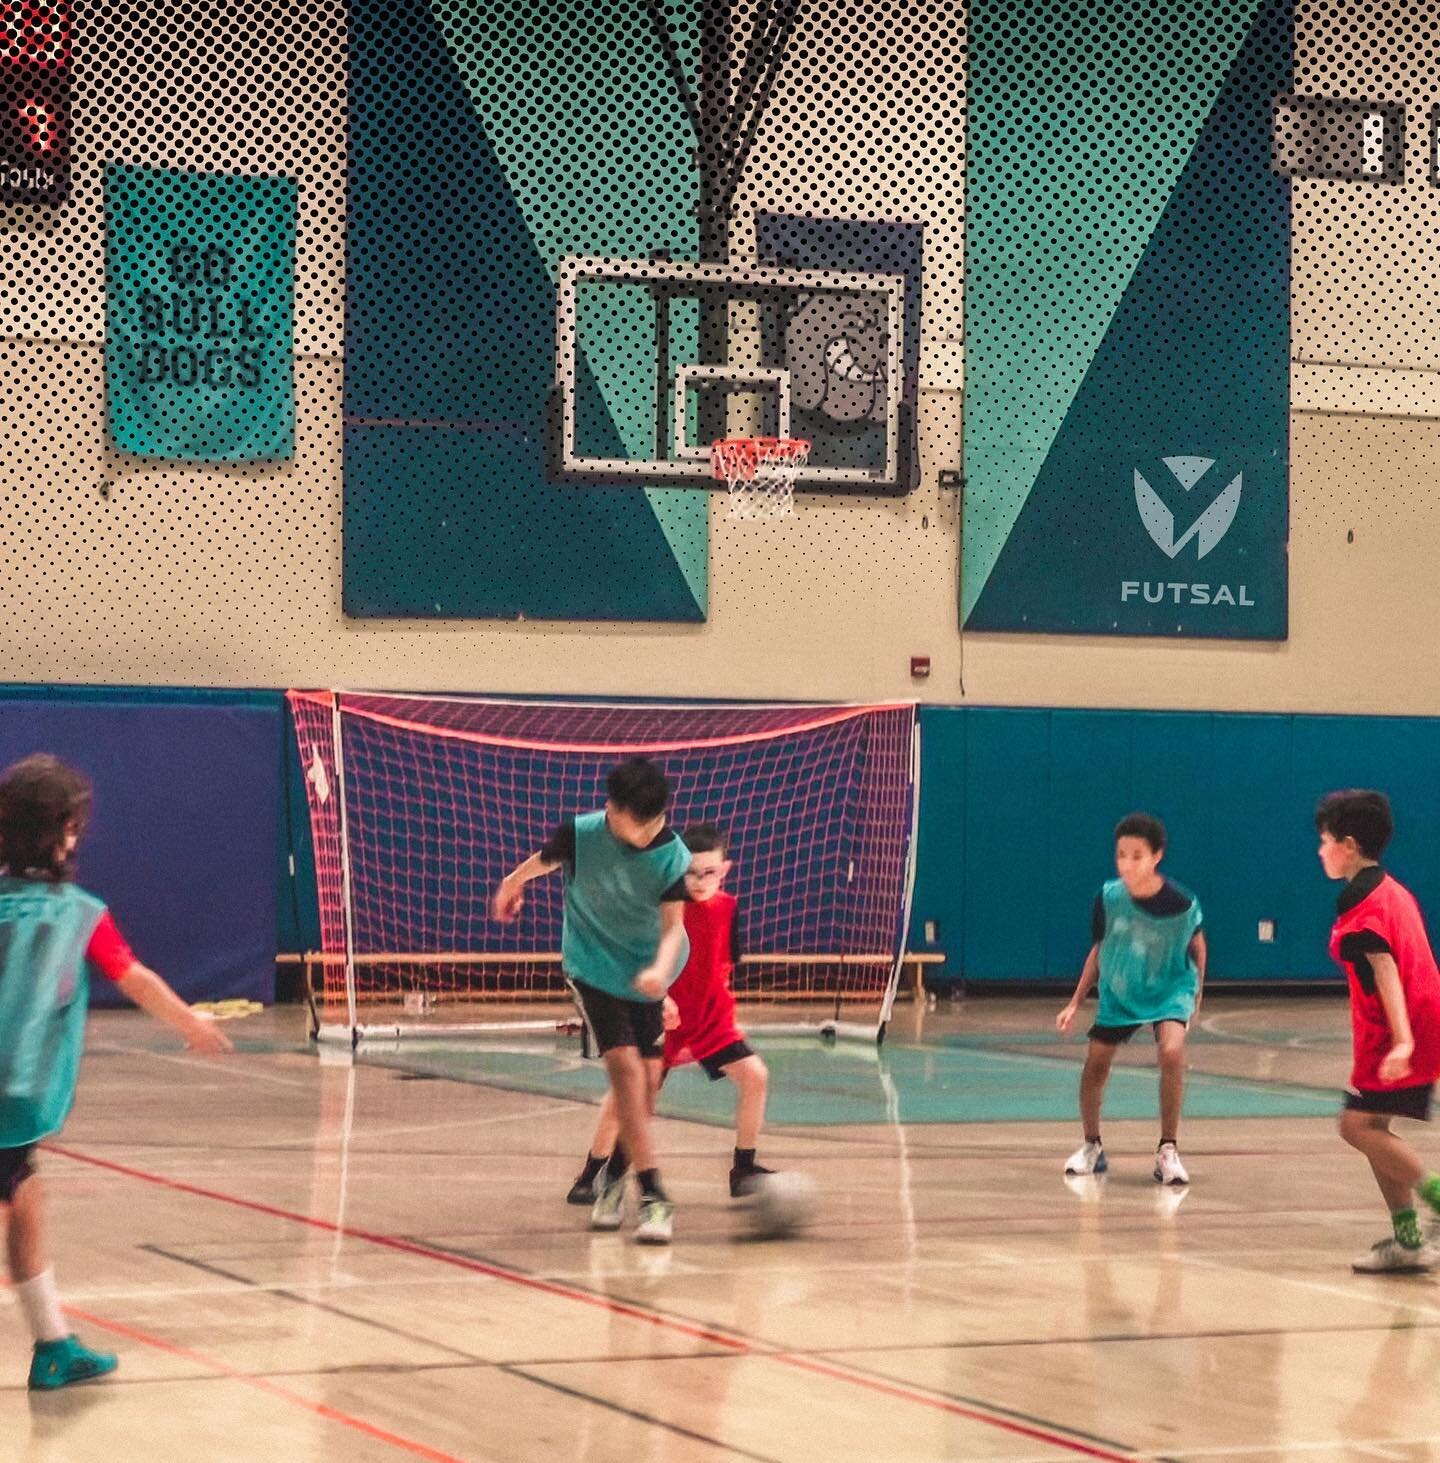 ⚡️⚽️ What an excellent week of futsal training that concentrated on the player's technical abilities. 

We'll have more next week. Training days are Monday, Wednesday, and Thursday. To register, click the link in our bio.